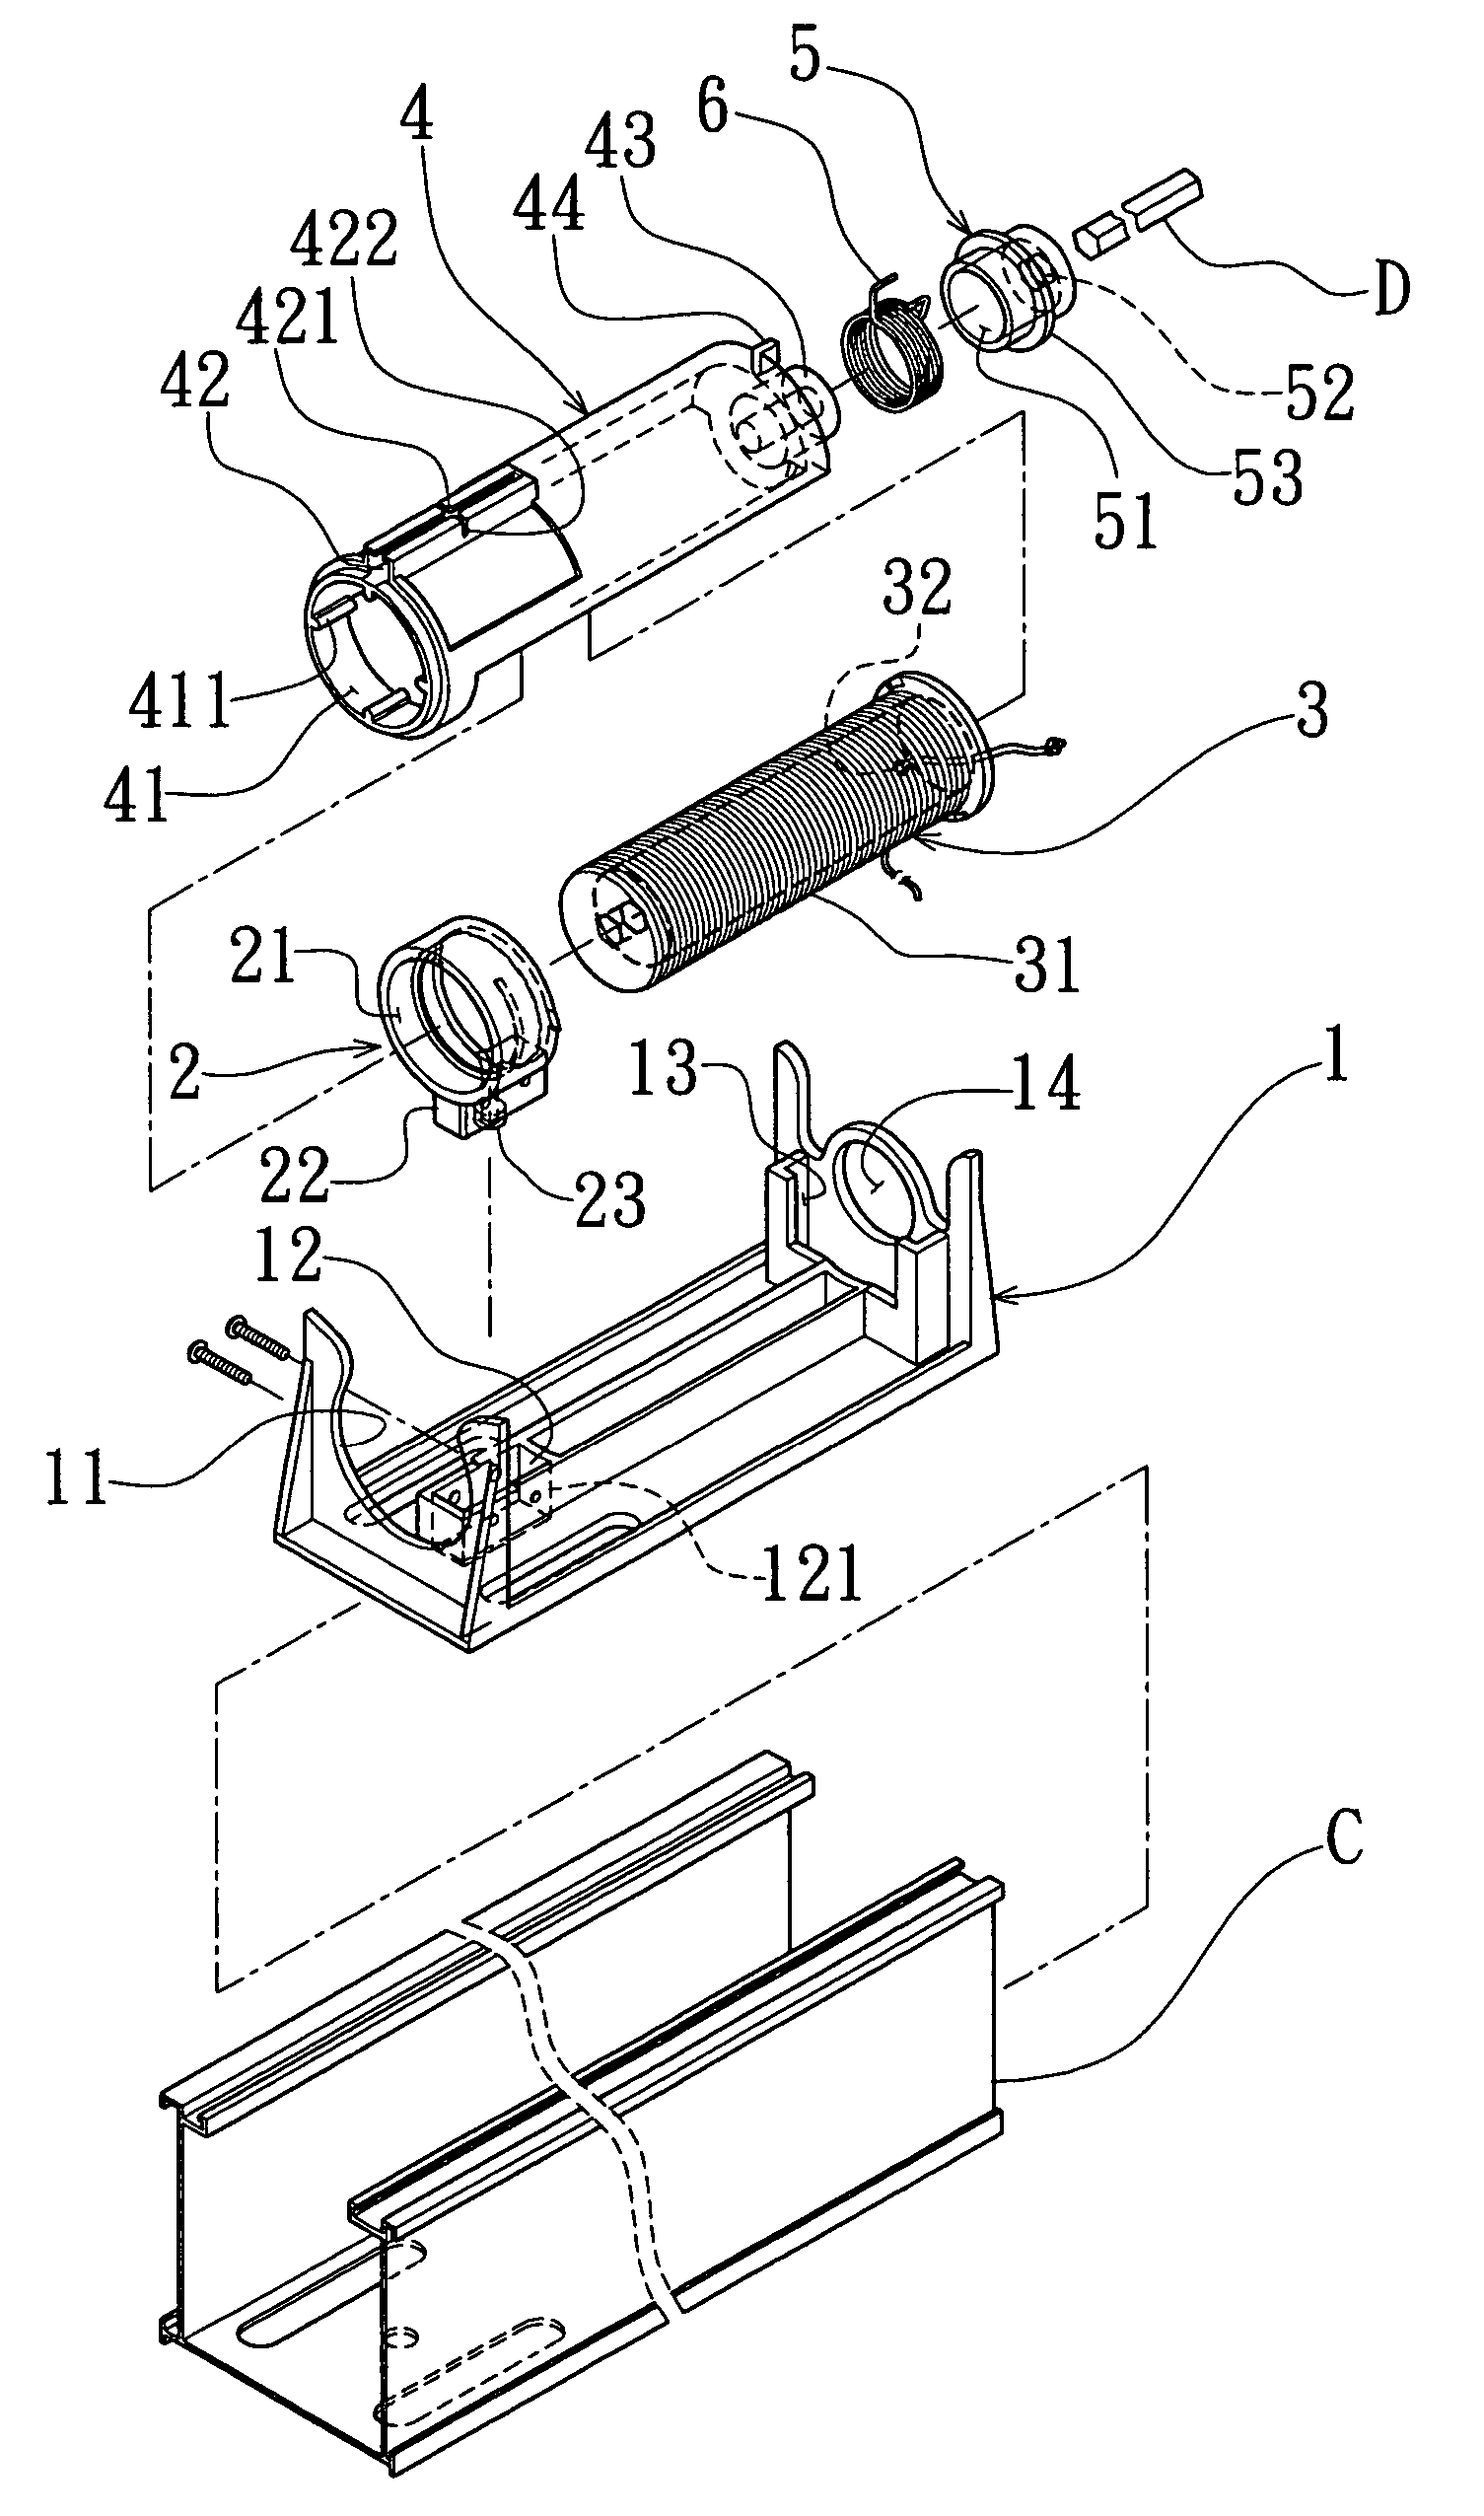 Tilt and lift device for adjusting tilt angle and height of slats of a Venetian blind